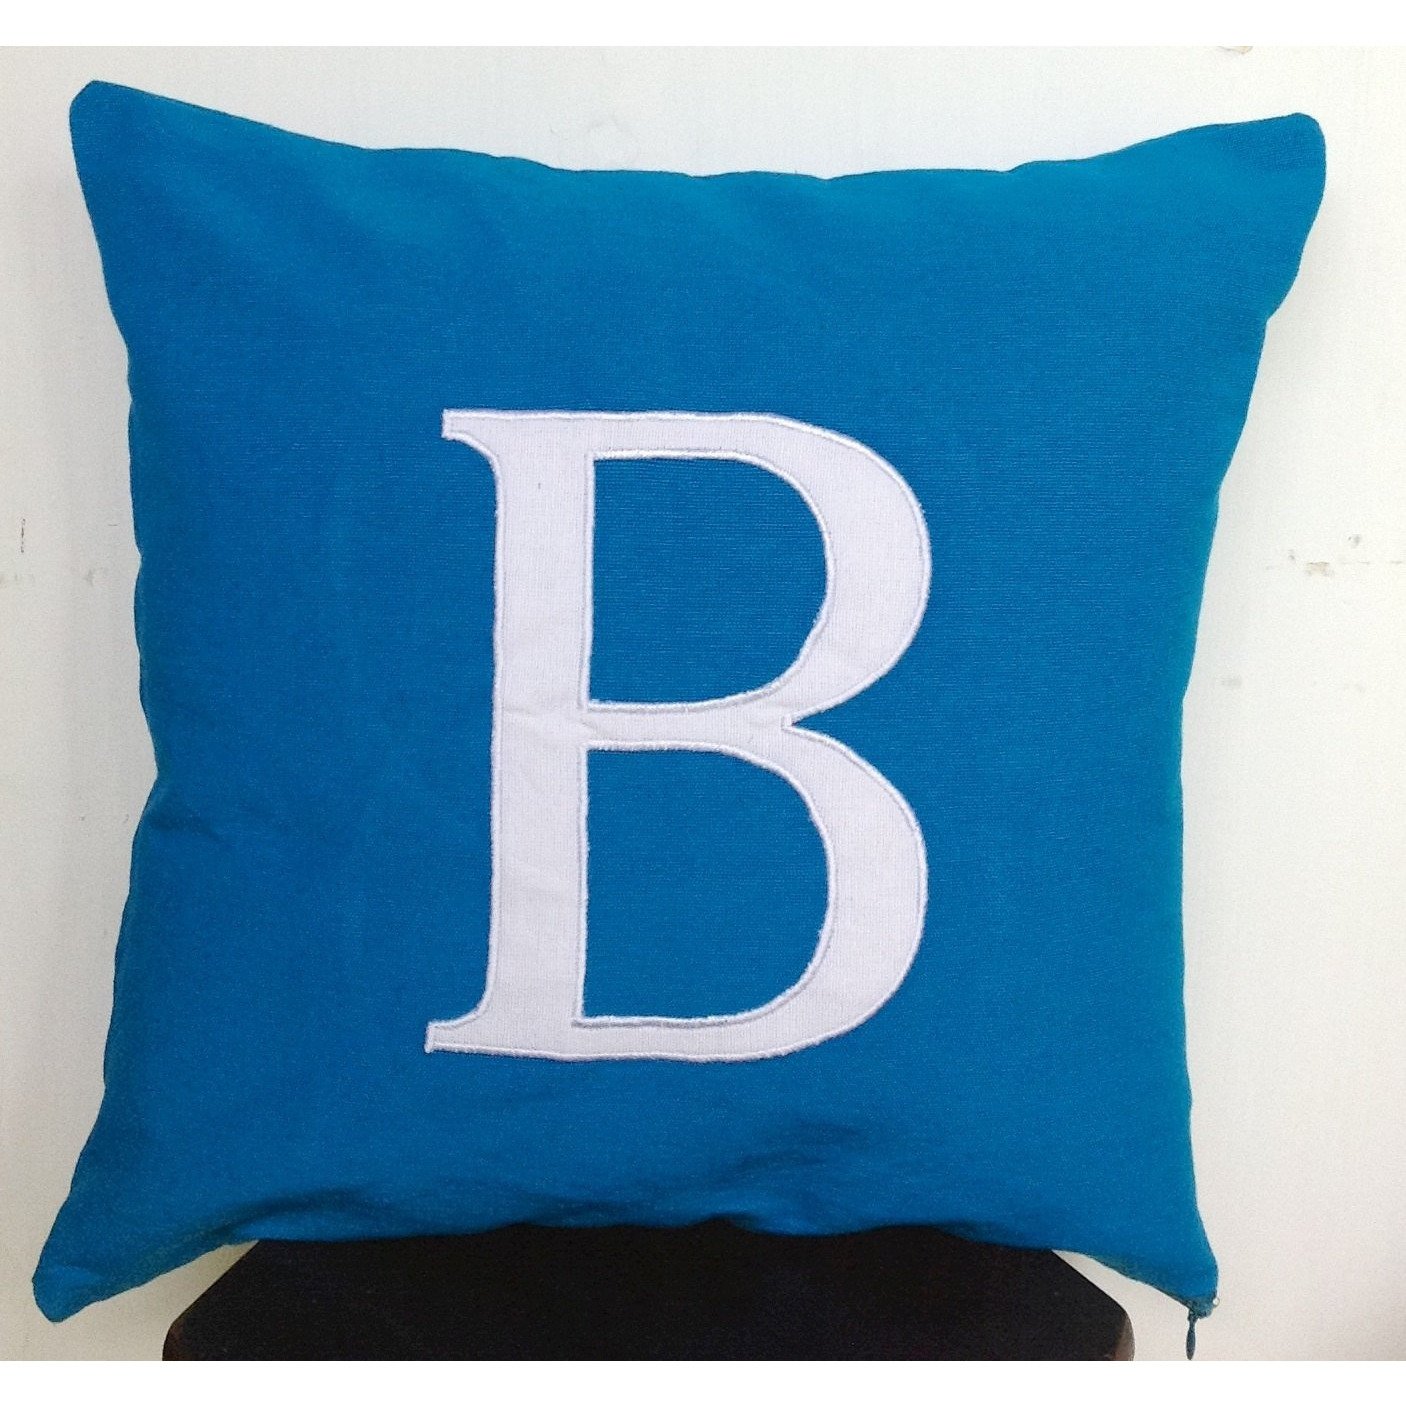 Unique Personalized Gifts, Blue Couch Monogram Pillow Cover